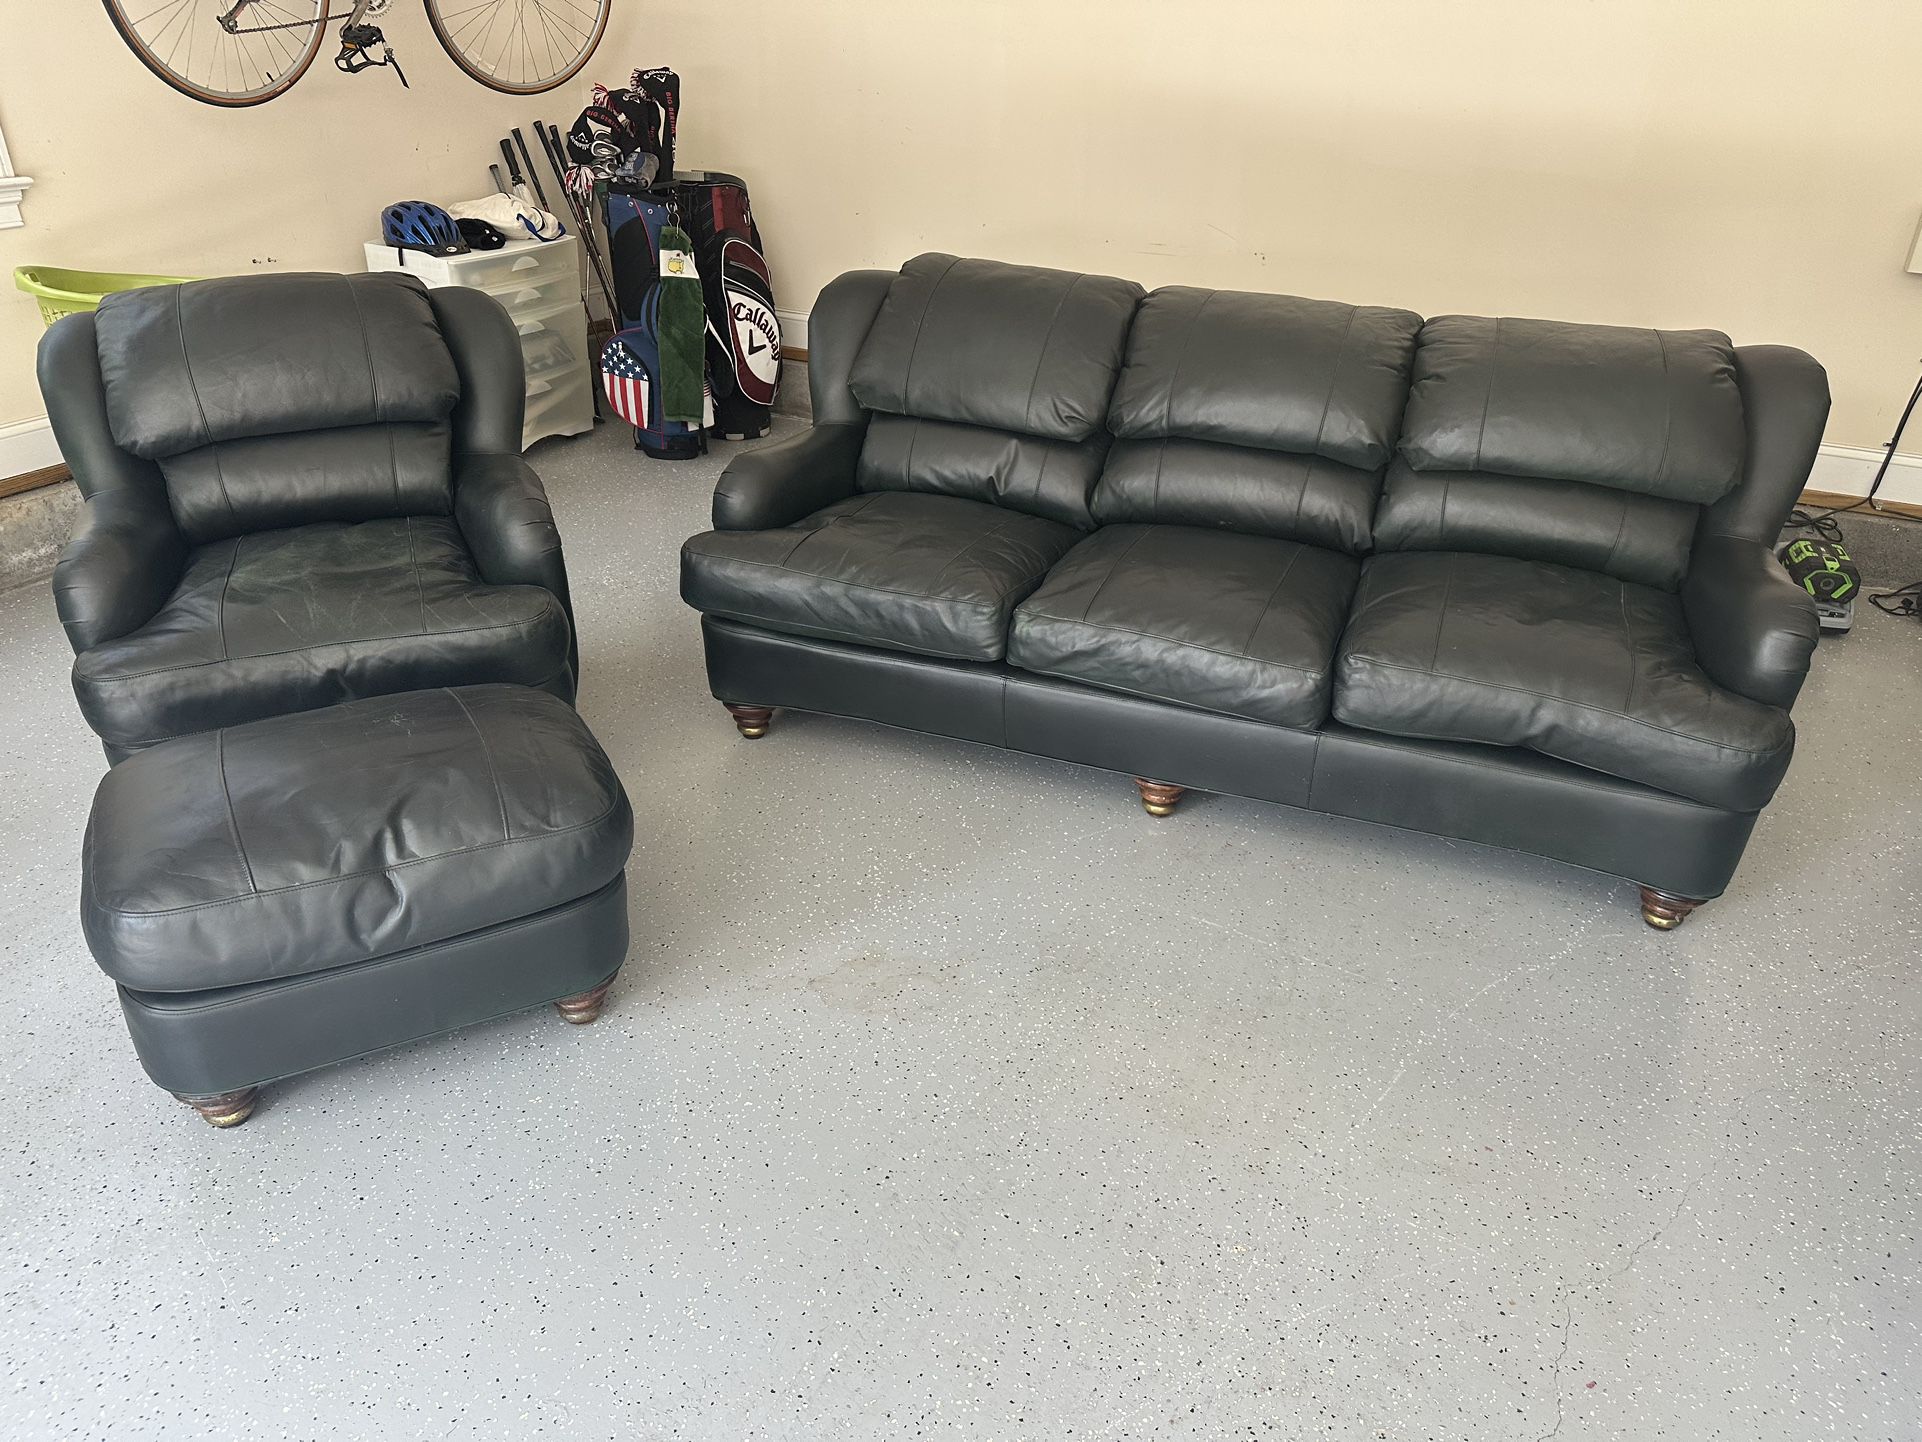 Delivery Included! - Dark Green Leather craft Sofa, Chair, and Ottoman 